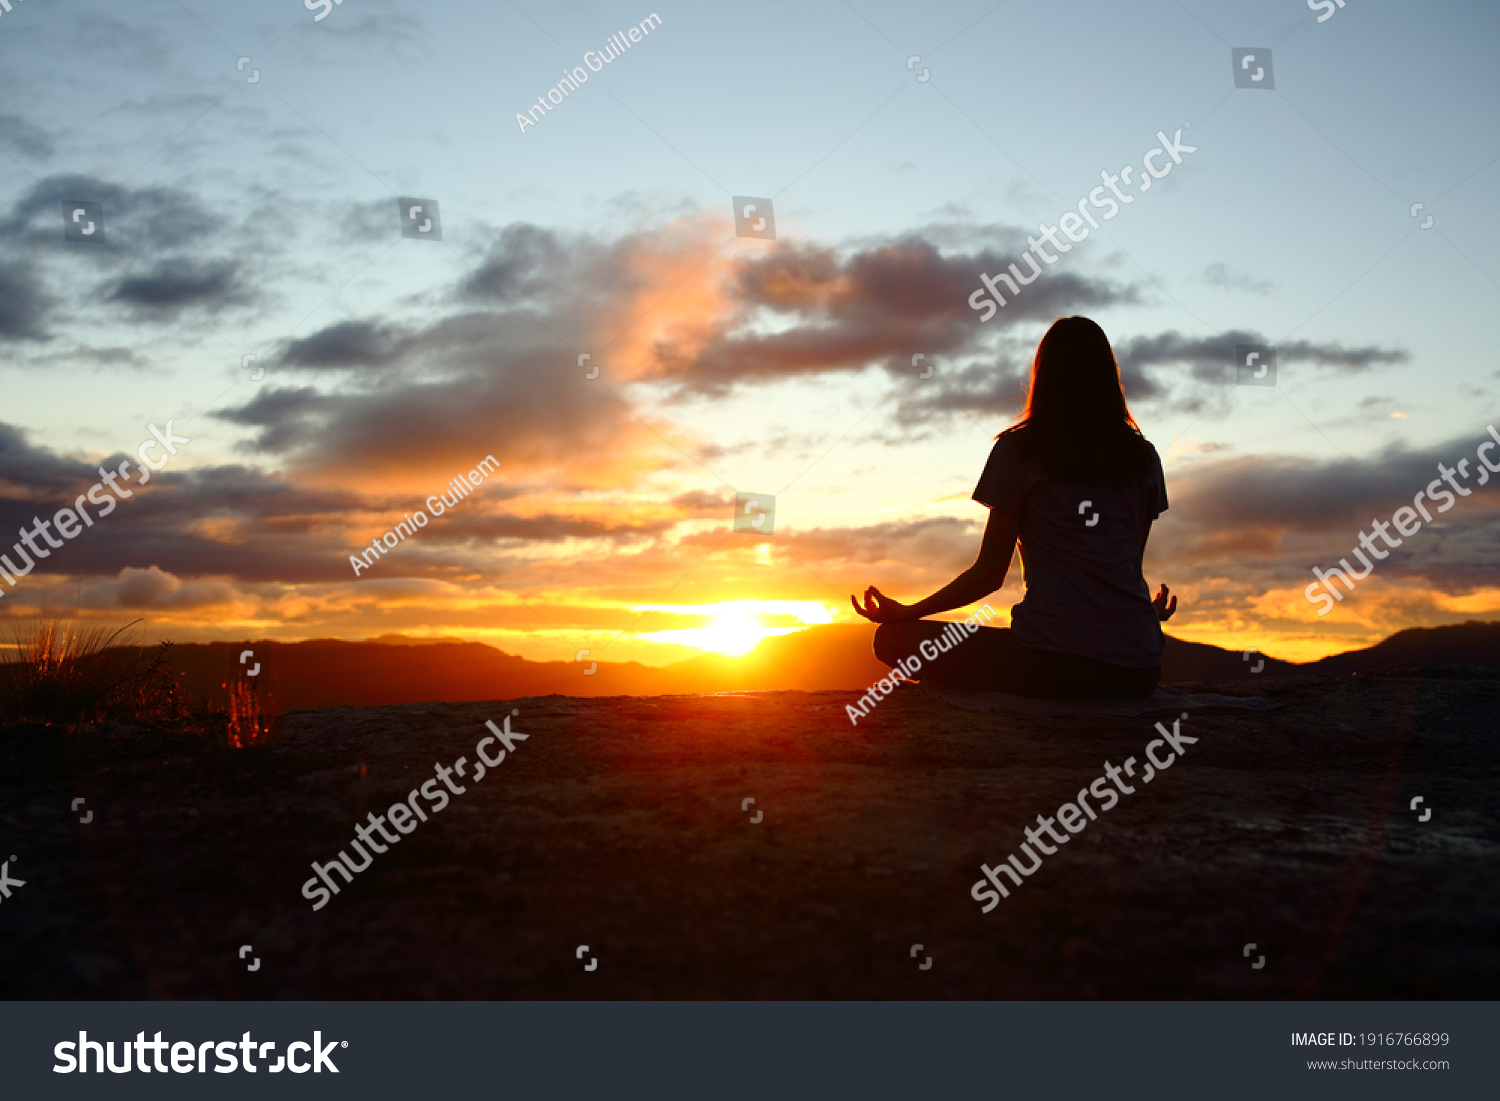 Back view portrait of a woman silhouette doing yoga at sunset in the mountain #1916766899